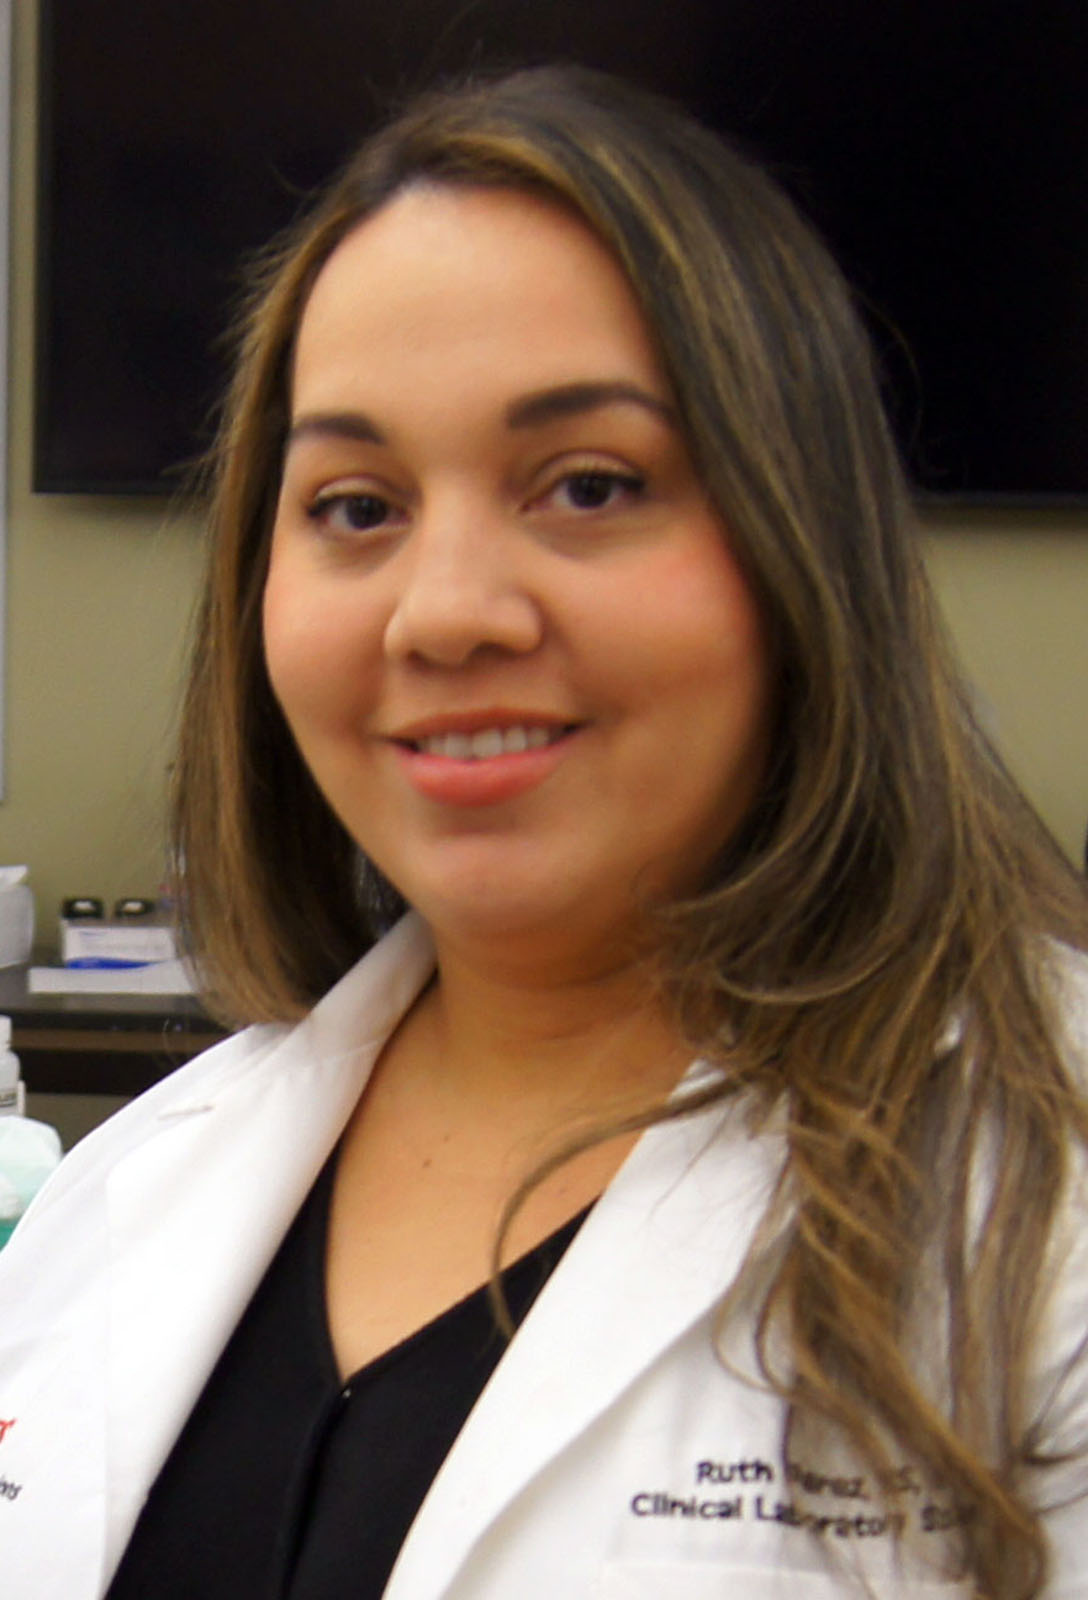 Ruth Perez from Department of Clinical Laboratory and Medical Imaging Sciences